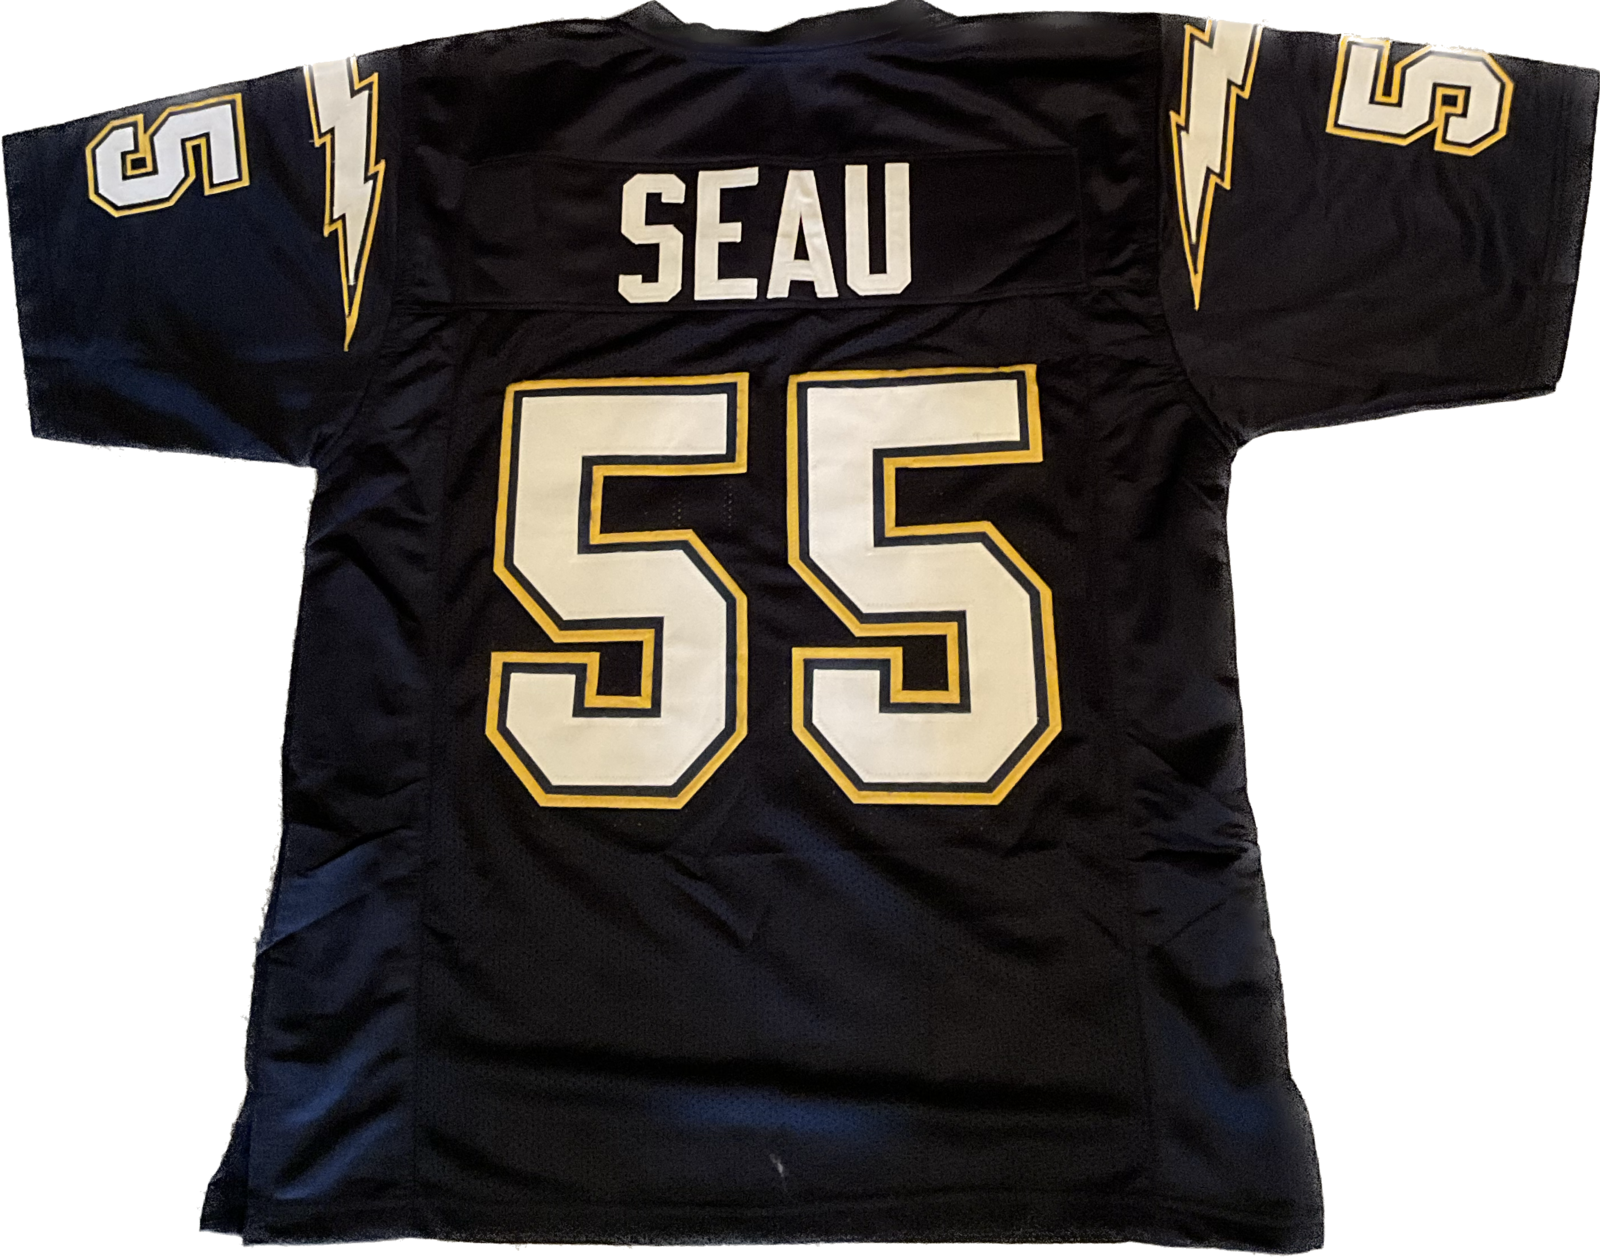 Unsigned Custom Stitched Junior Seau #55 Navy Blue Jersey FREE SHIPPING TOO! - $69.99